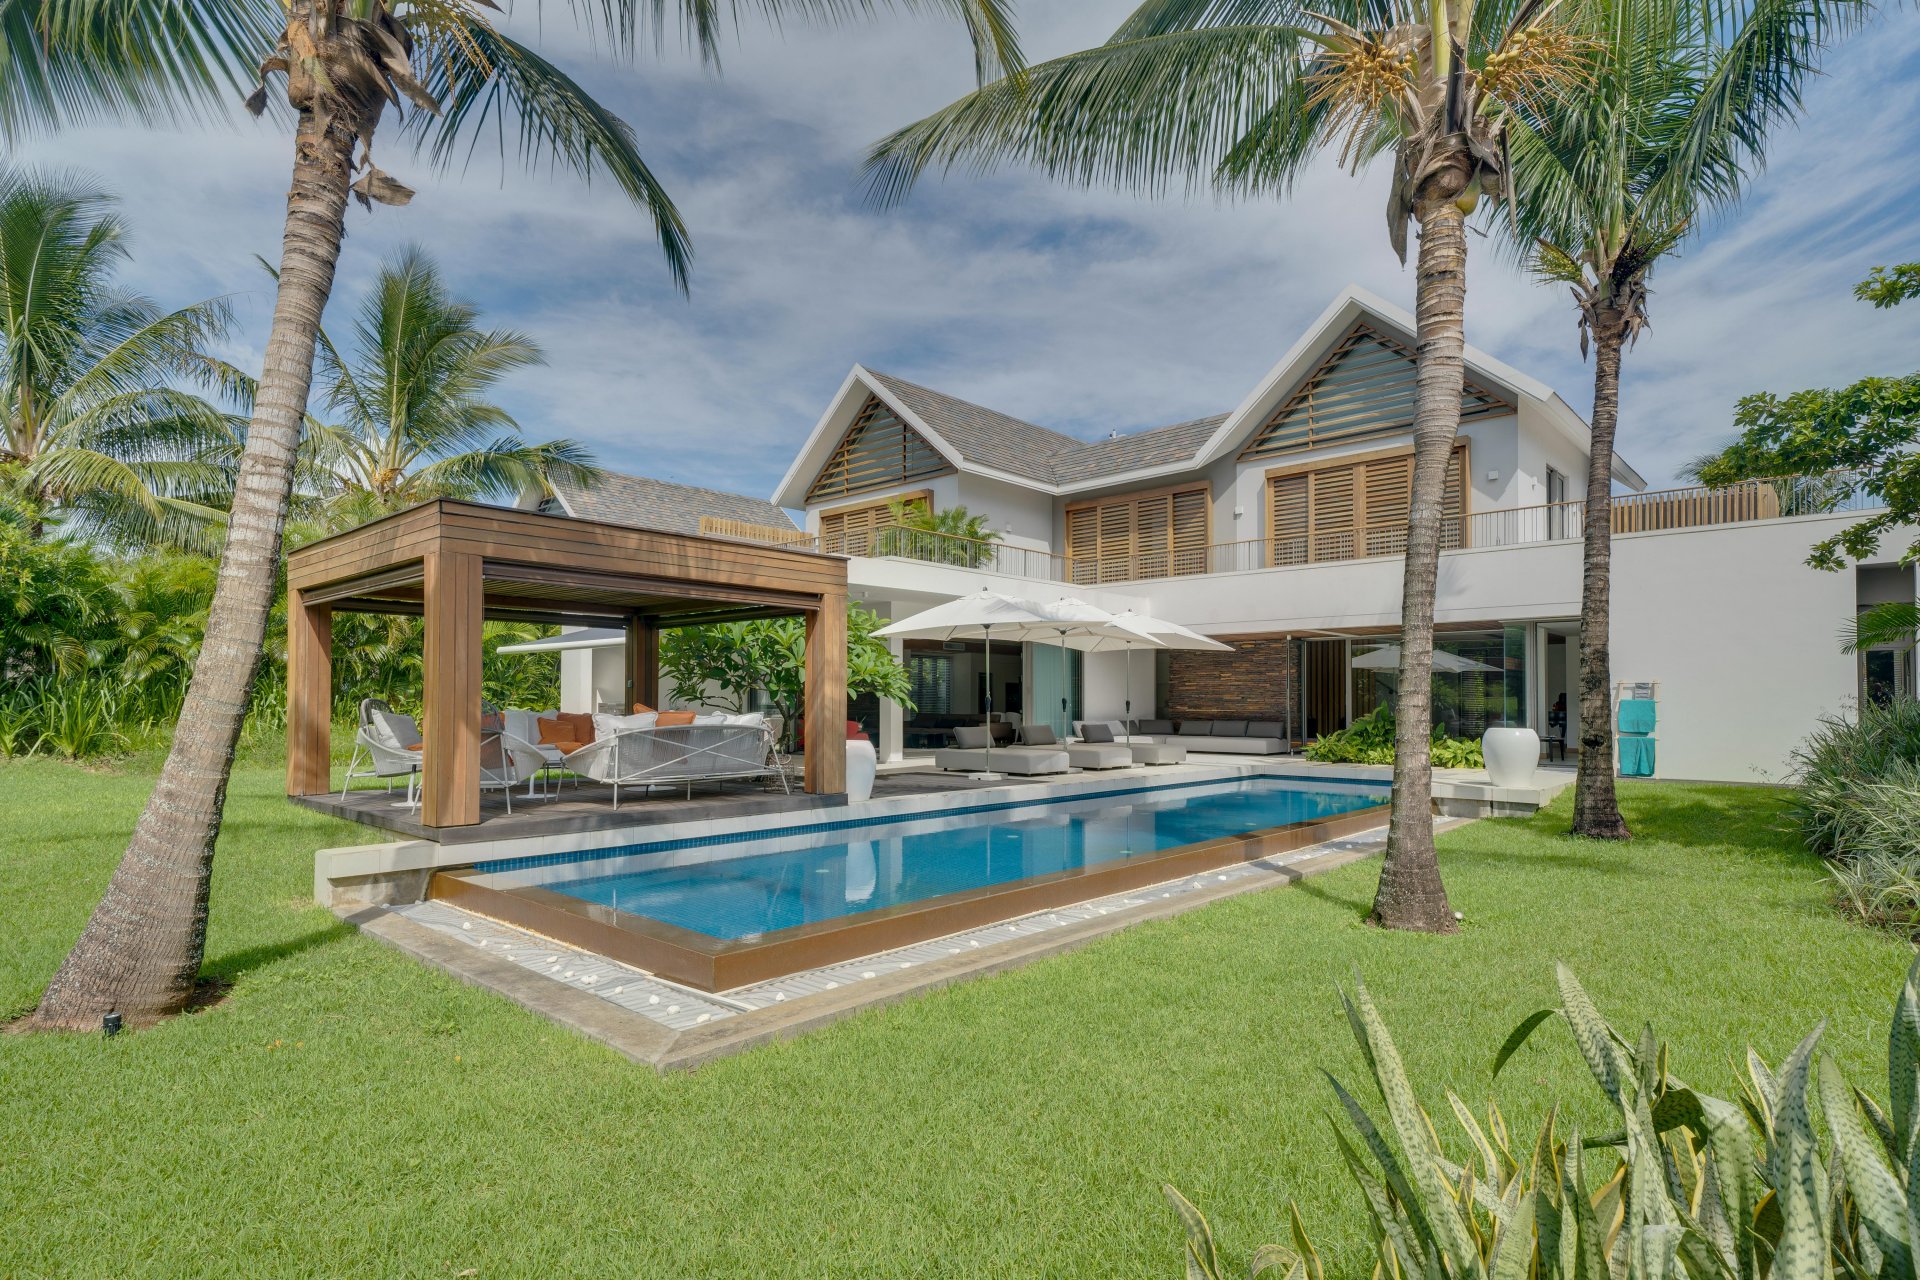 Grand Baie - Mauritius - House, 5 rooms, 4 bedrooms - Slideshow Picture 4